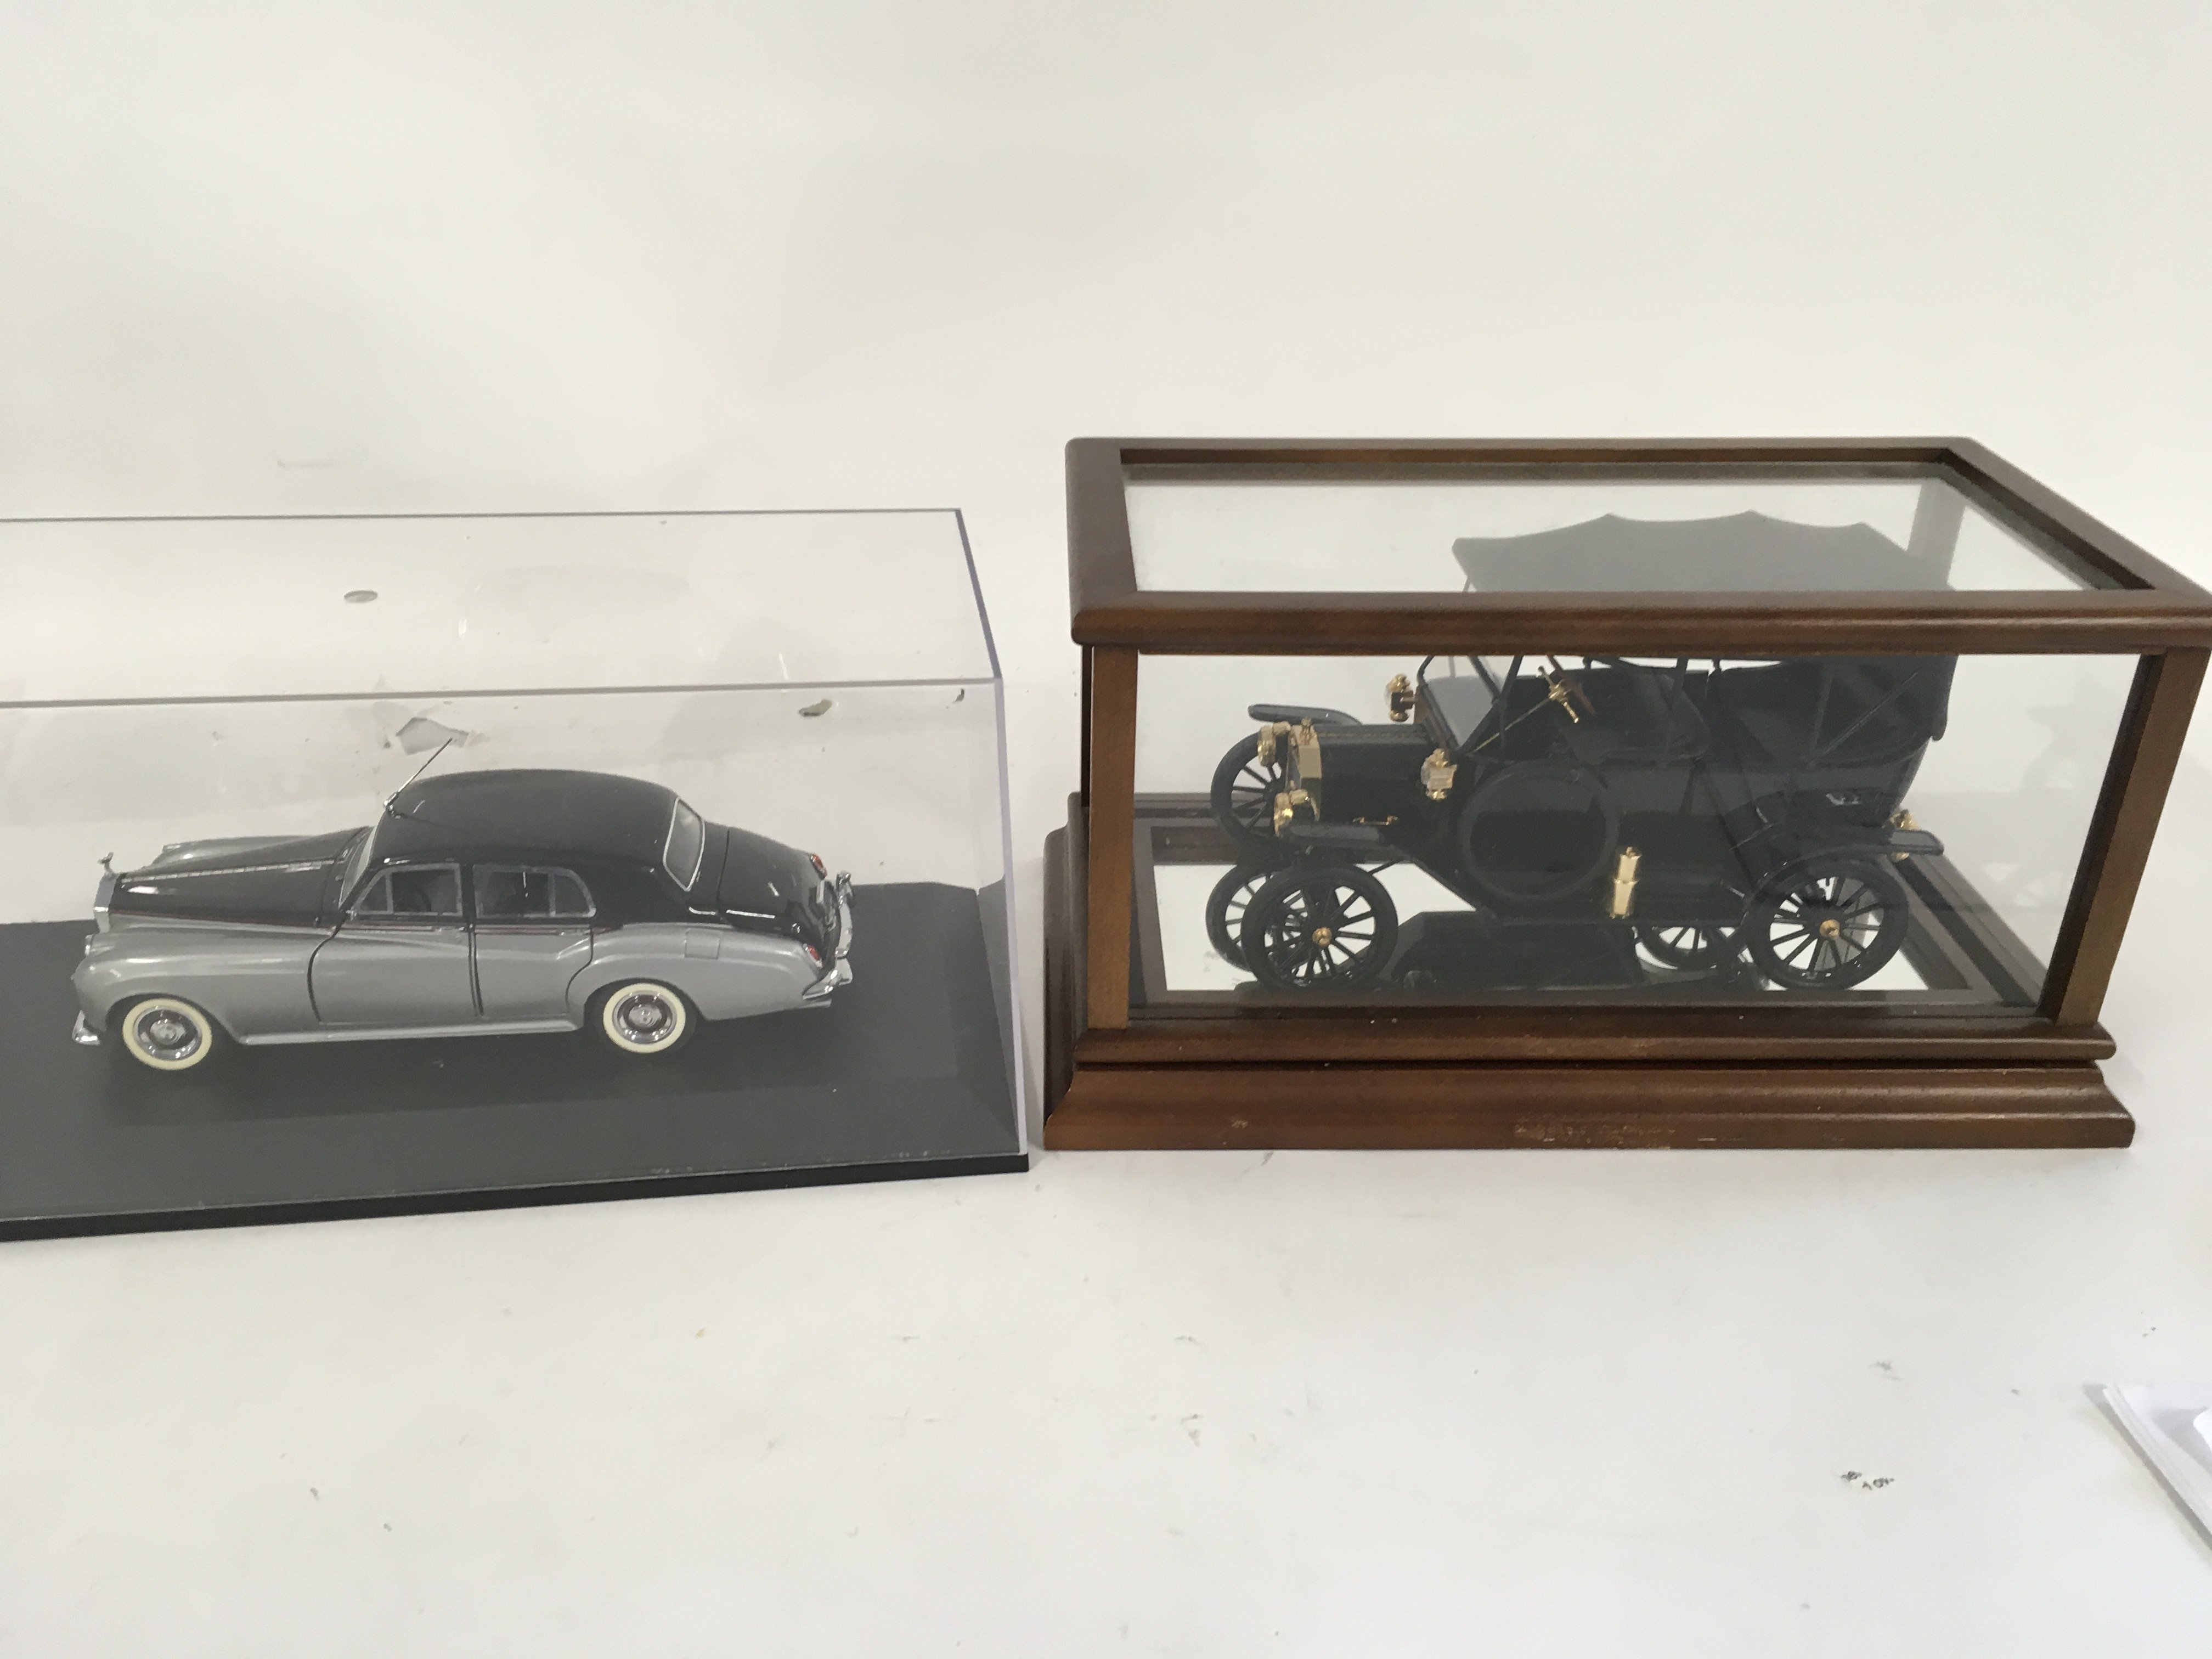 Three precision model cars by Franklin Mint both in presentation cases. Cars are 2 x RollsRoyce